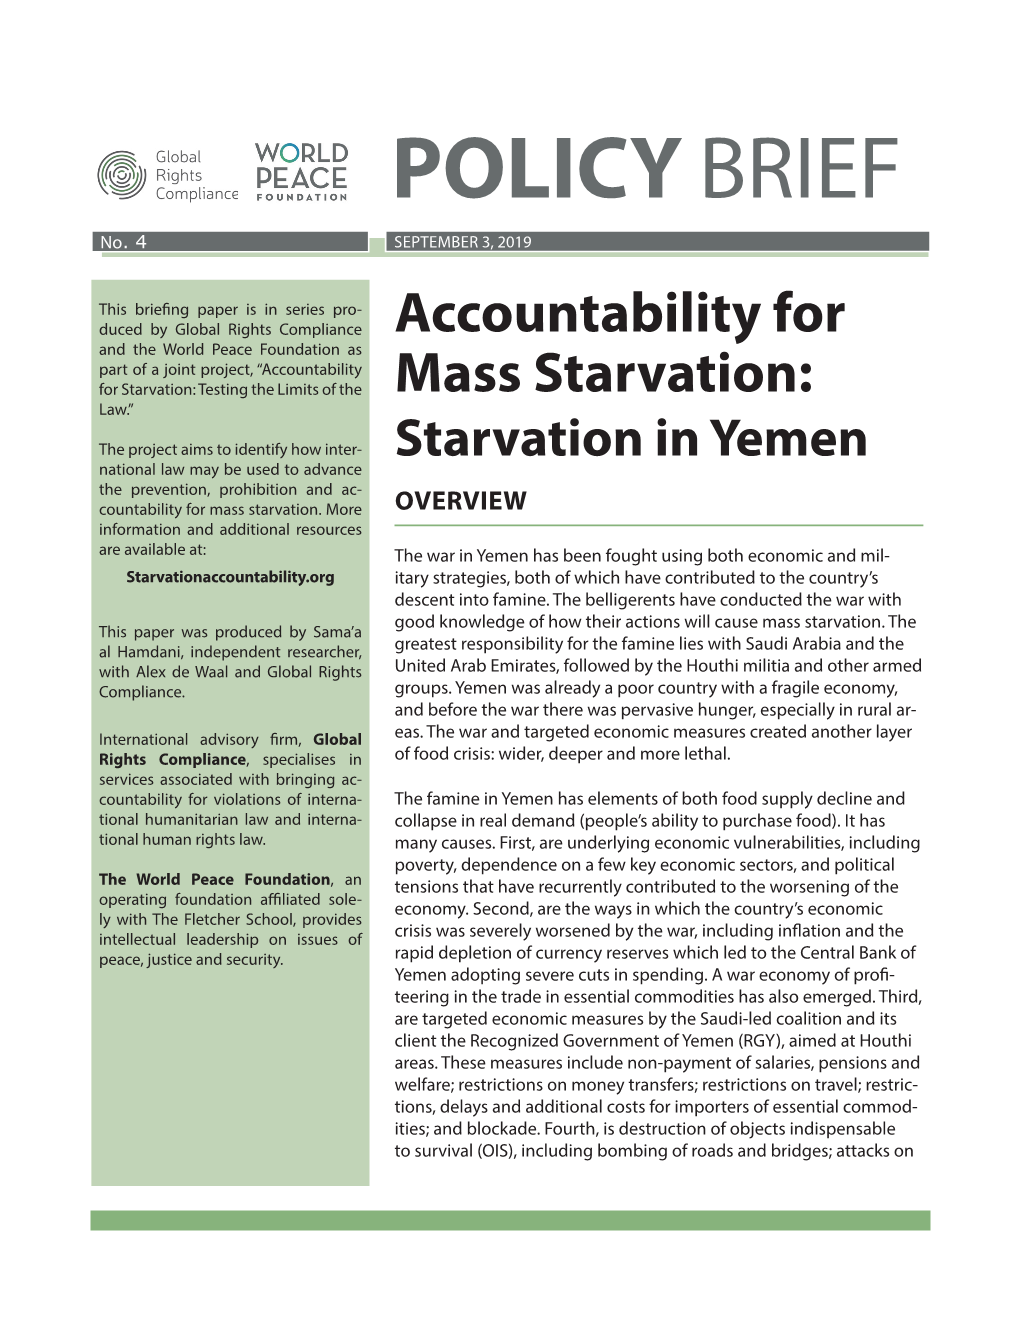 Yemen National Law May Be Used to Advance the Prevention, Prohibition and Ac- Countability for Mass Starvation